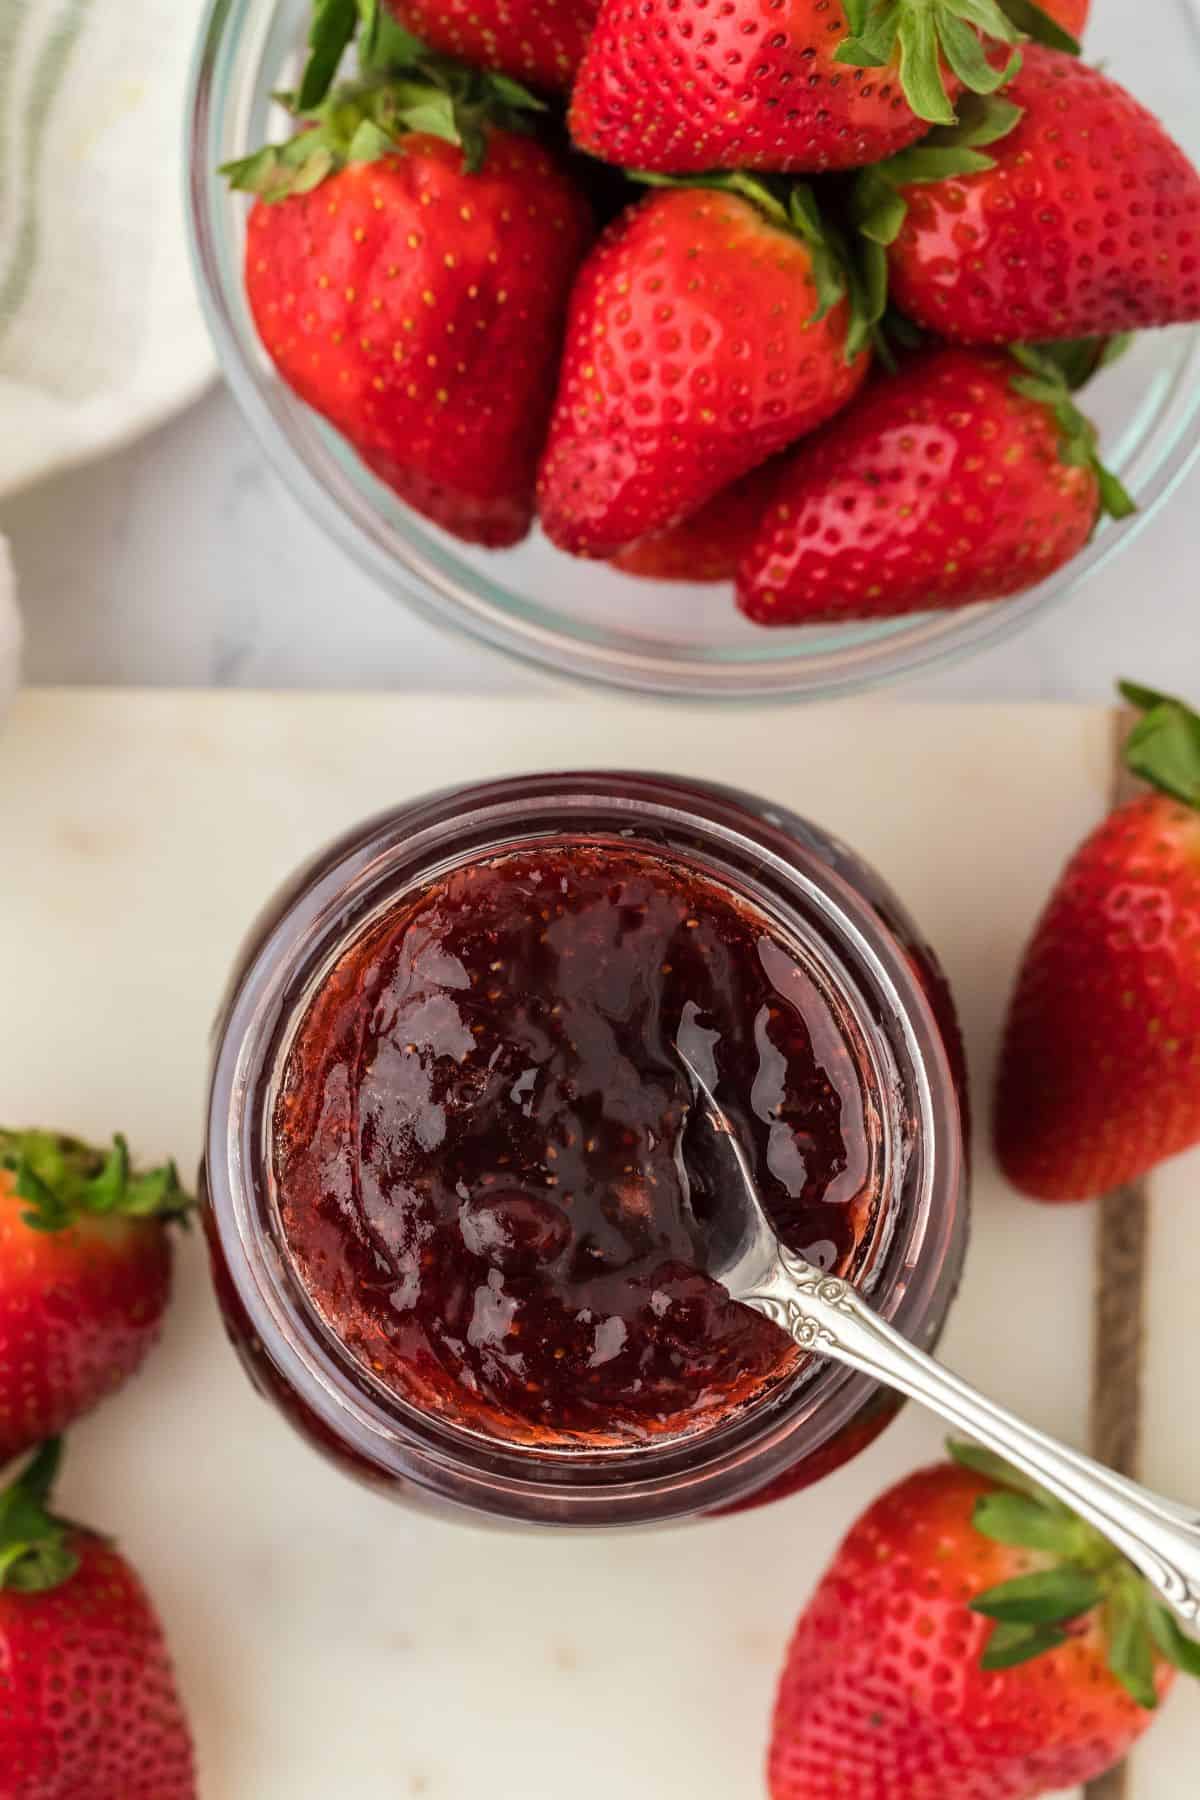 Overhead shot of a glass jar filled with strawberry preserves, with a spoon resting inside it. Surrounding the jar are fresh, whole strawberries in a cutting board and in a glass bowl